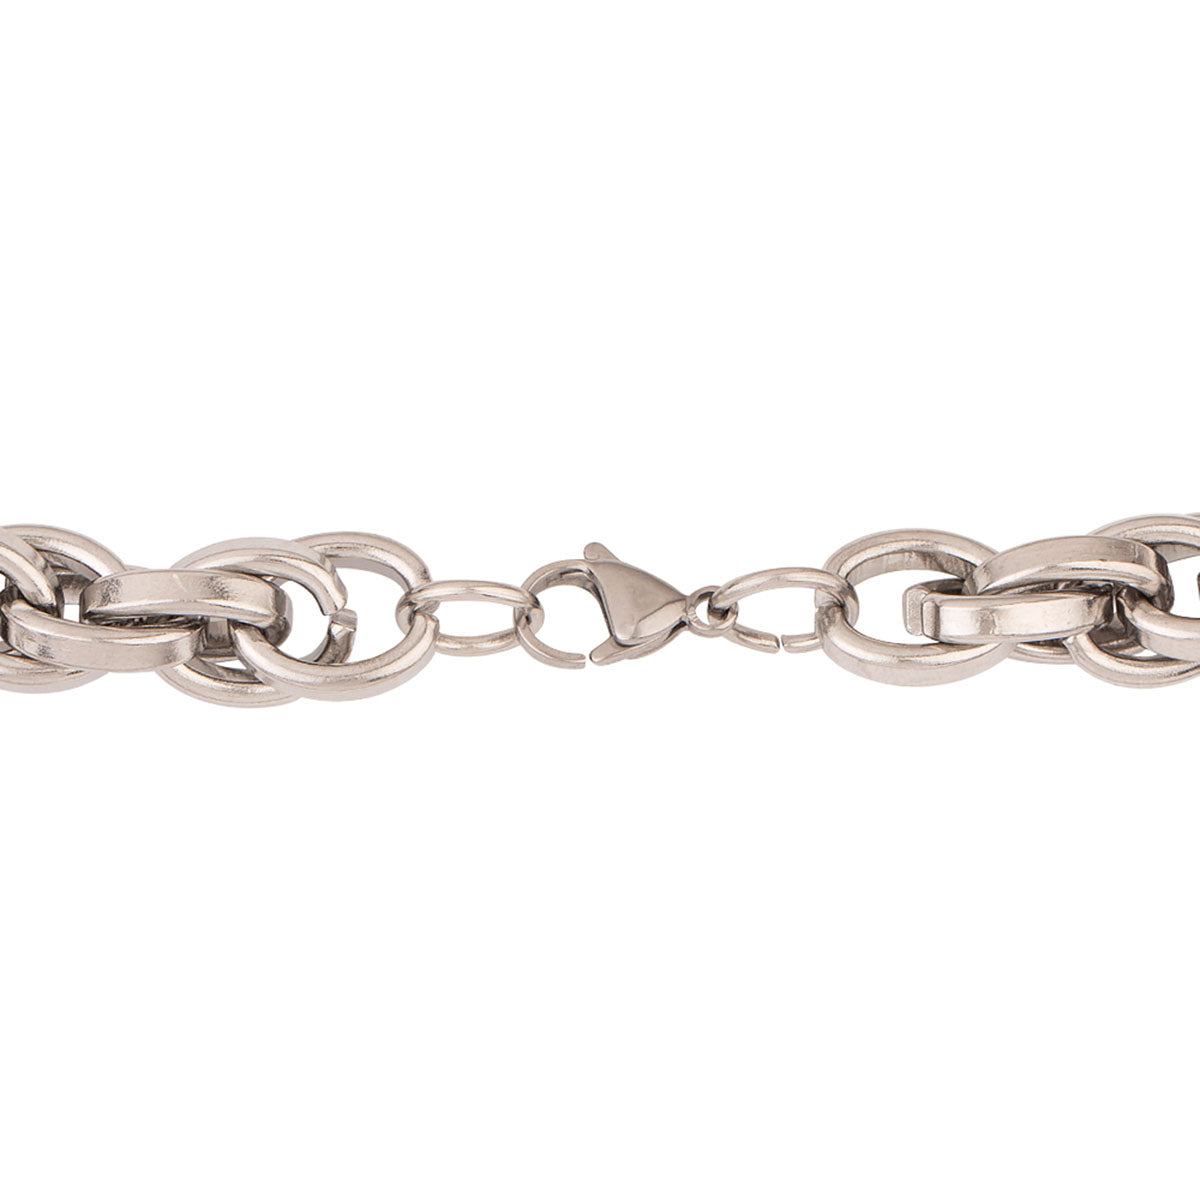 Royal Links Silver Plated Link Chain